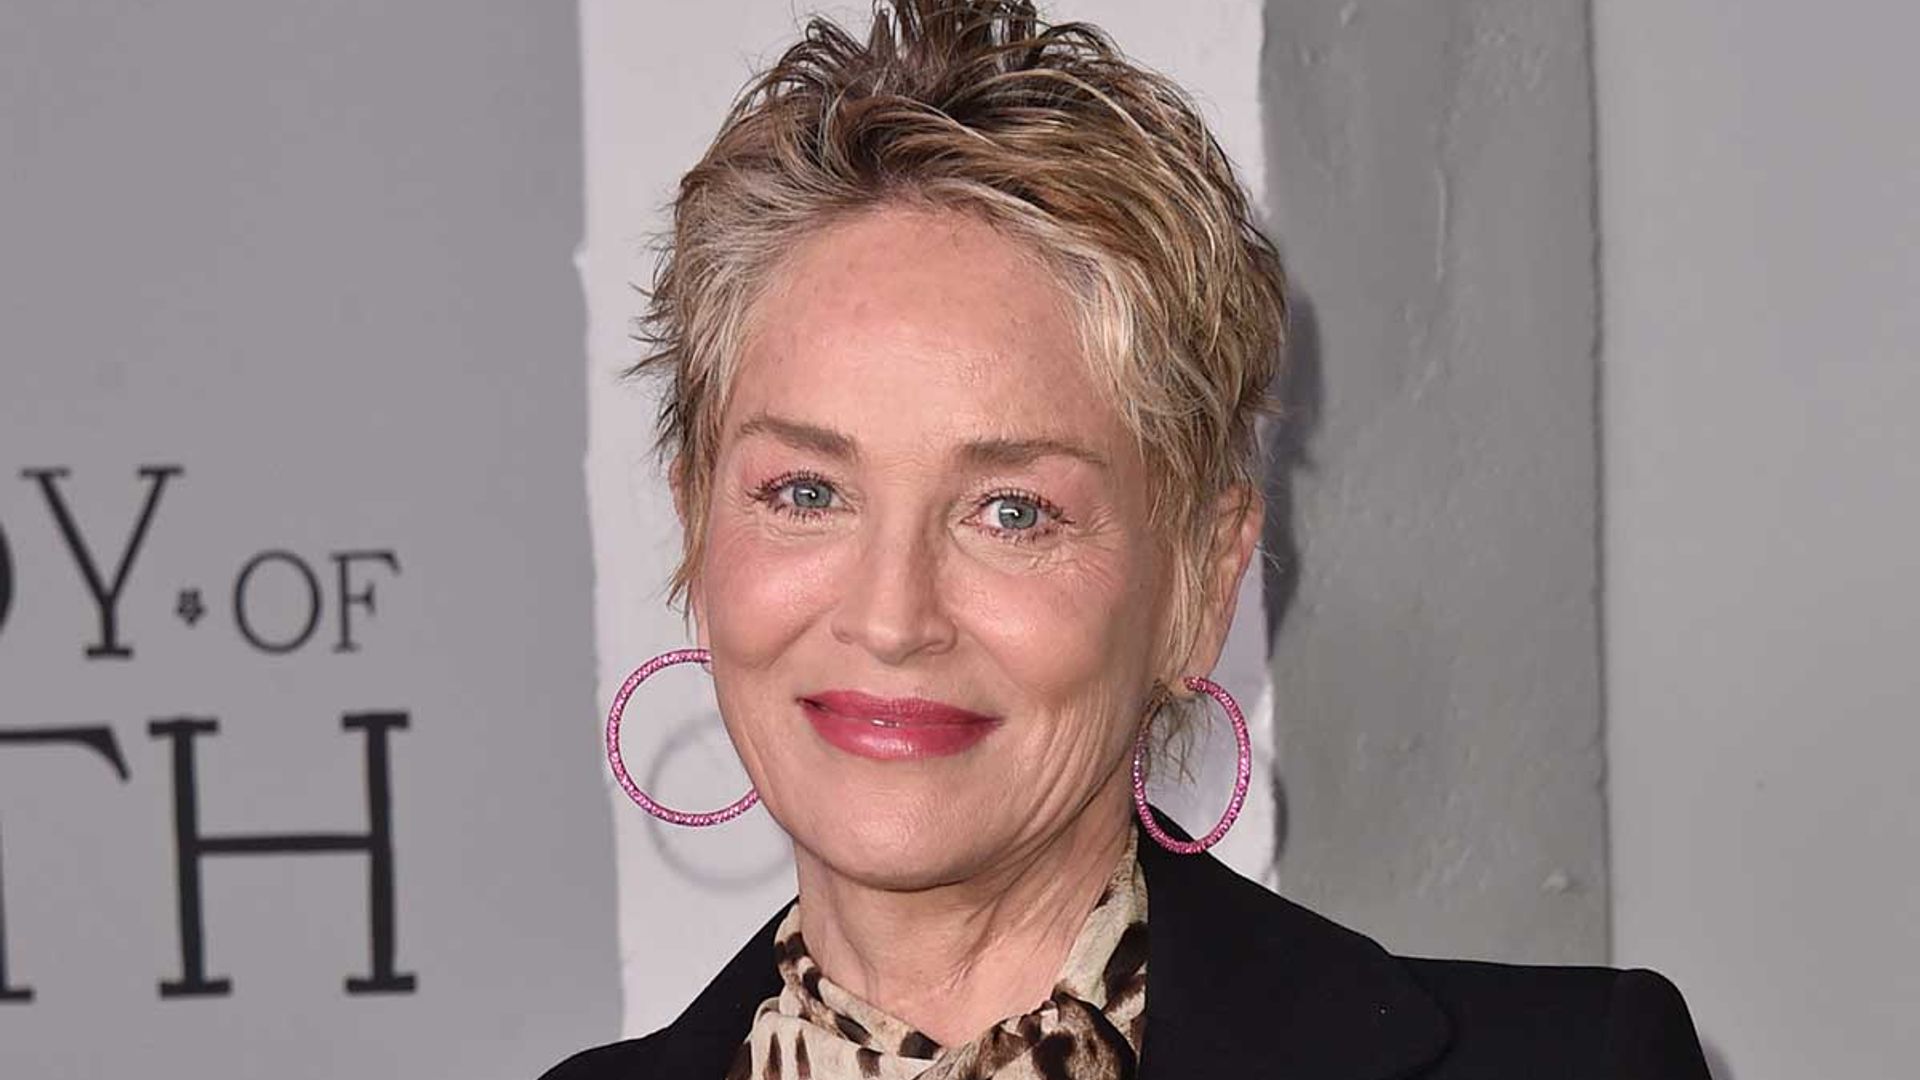 Sharon Stone stuns with gorgeous hair transformation in surprise new appearance